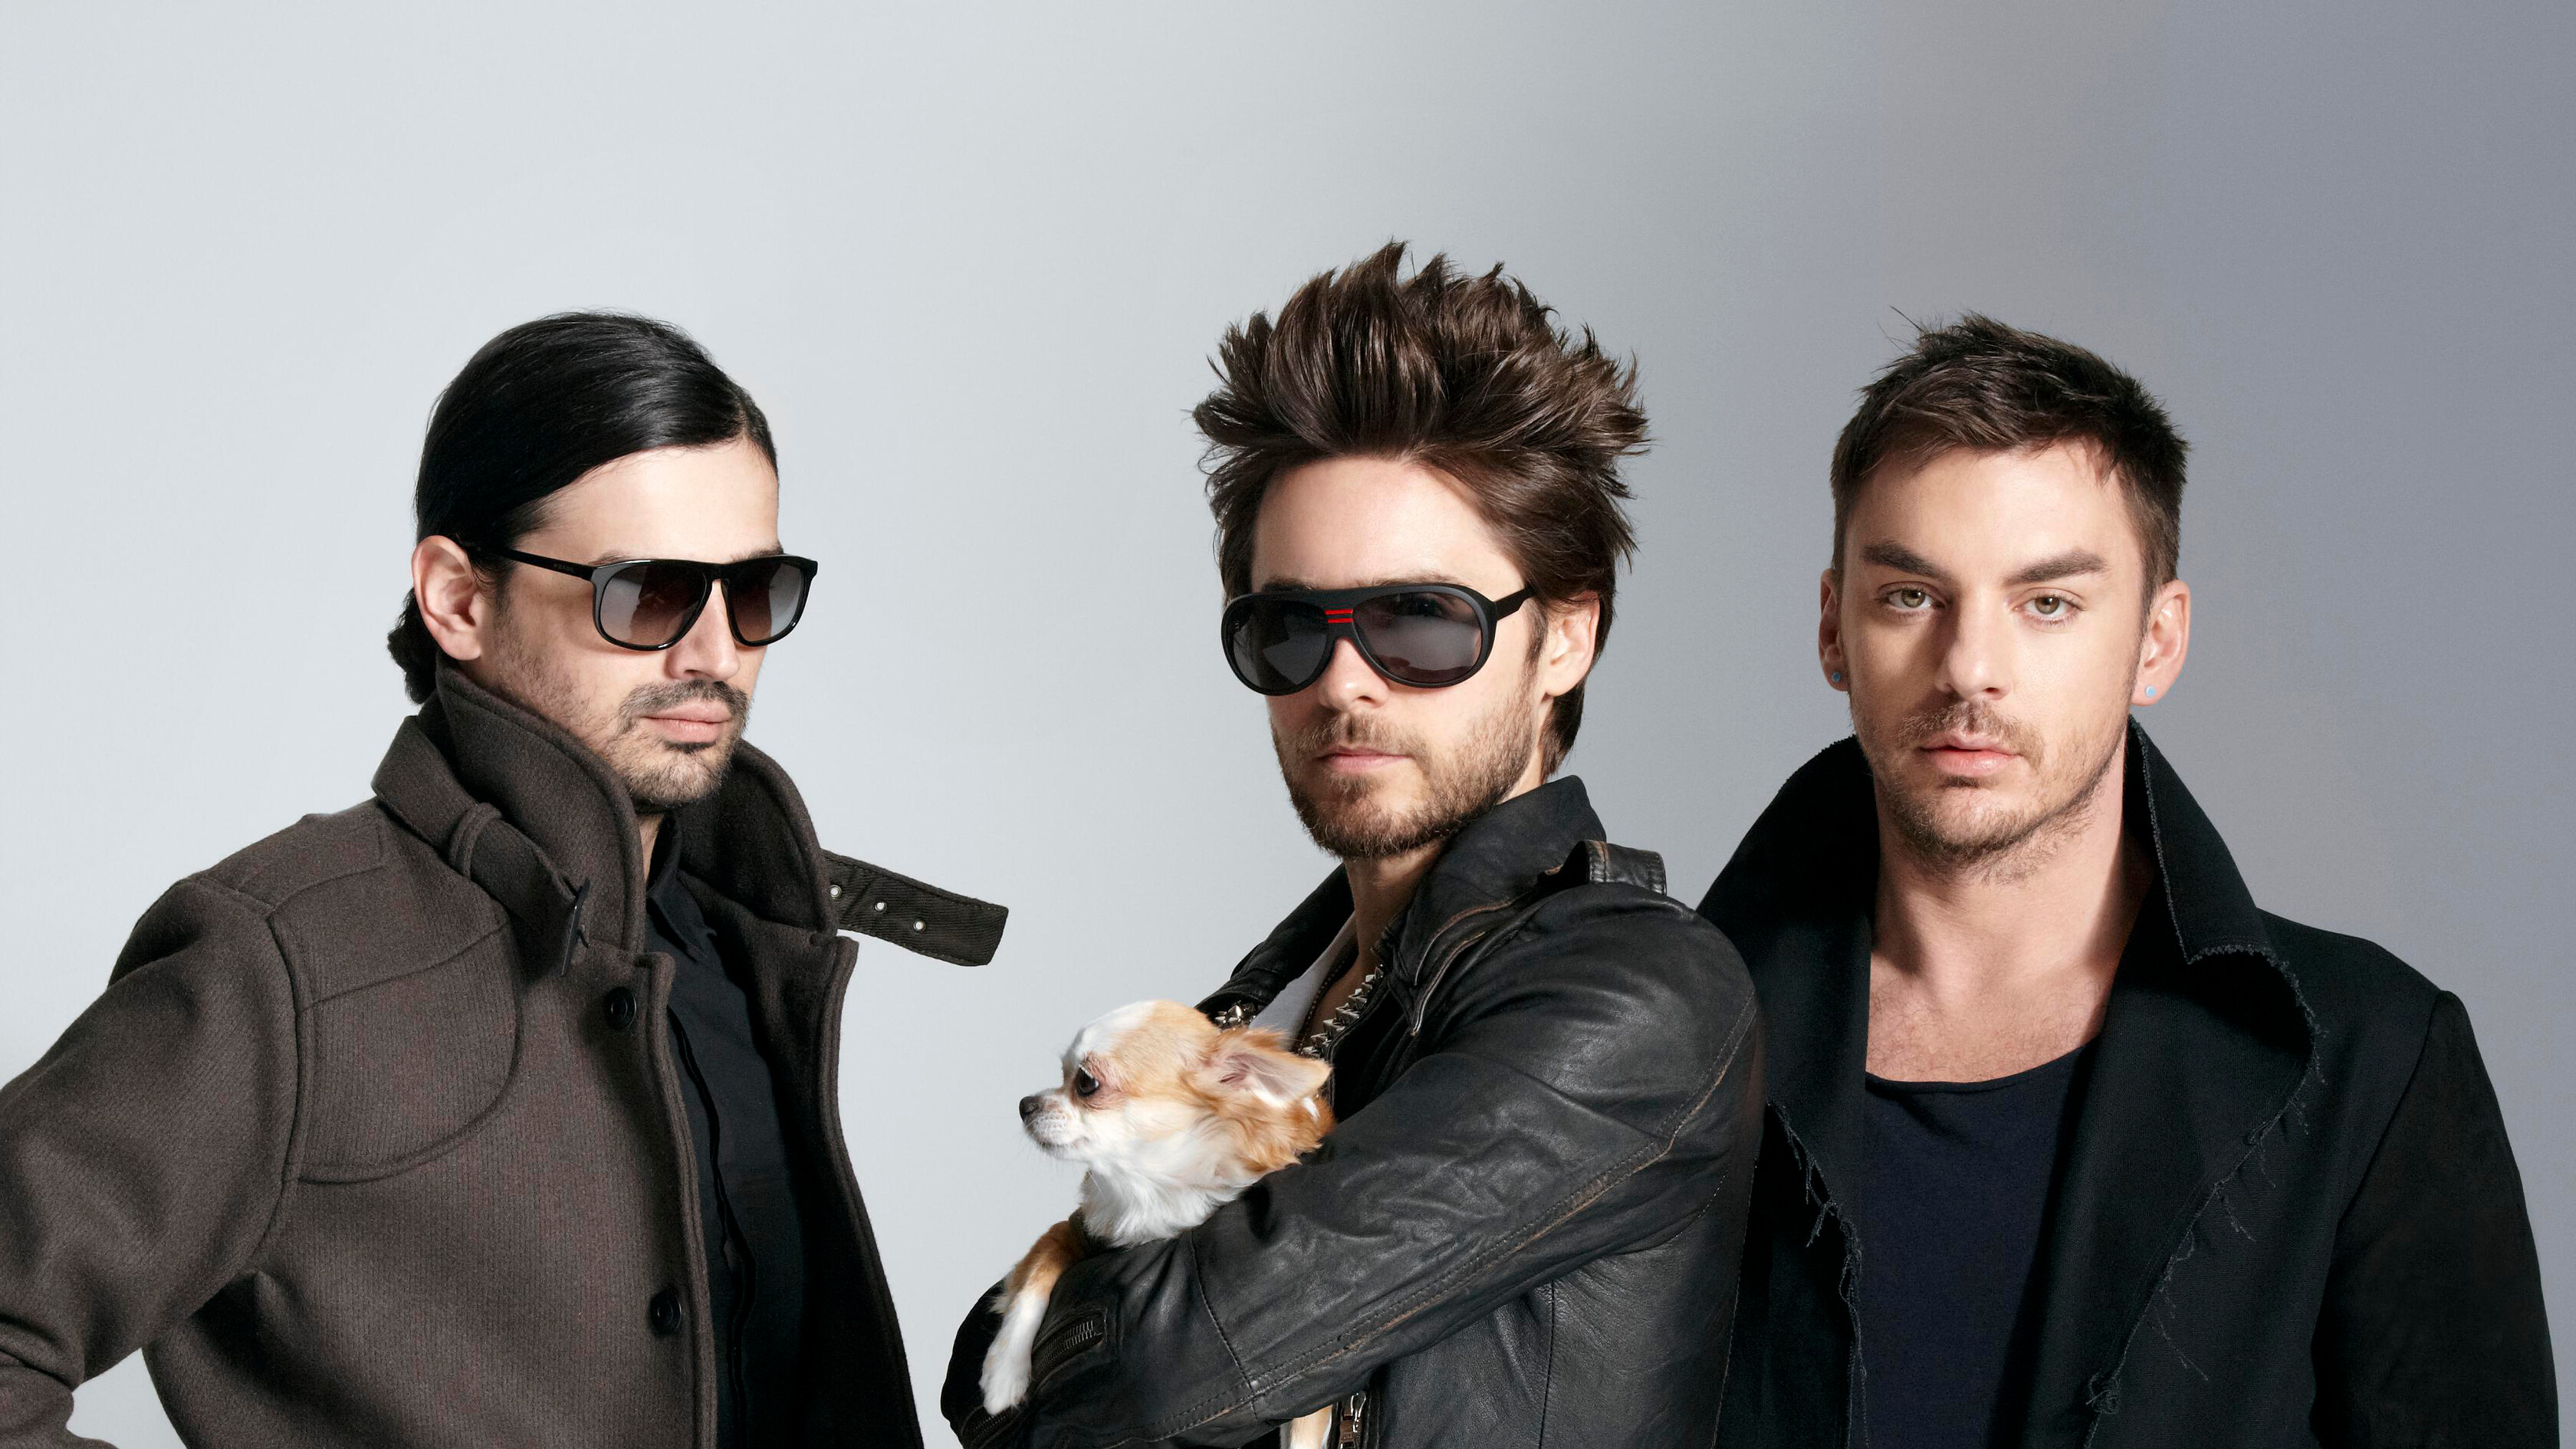 Thirty Seconds to Mars: "The Kill", was released on January 24, 2006 as the second single from their second album, A Beautiful Lie. 3360x1890 HD Wallpaper.